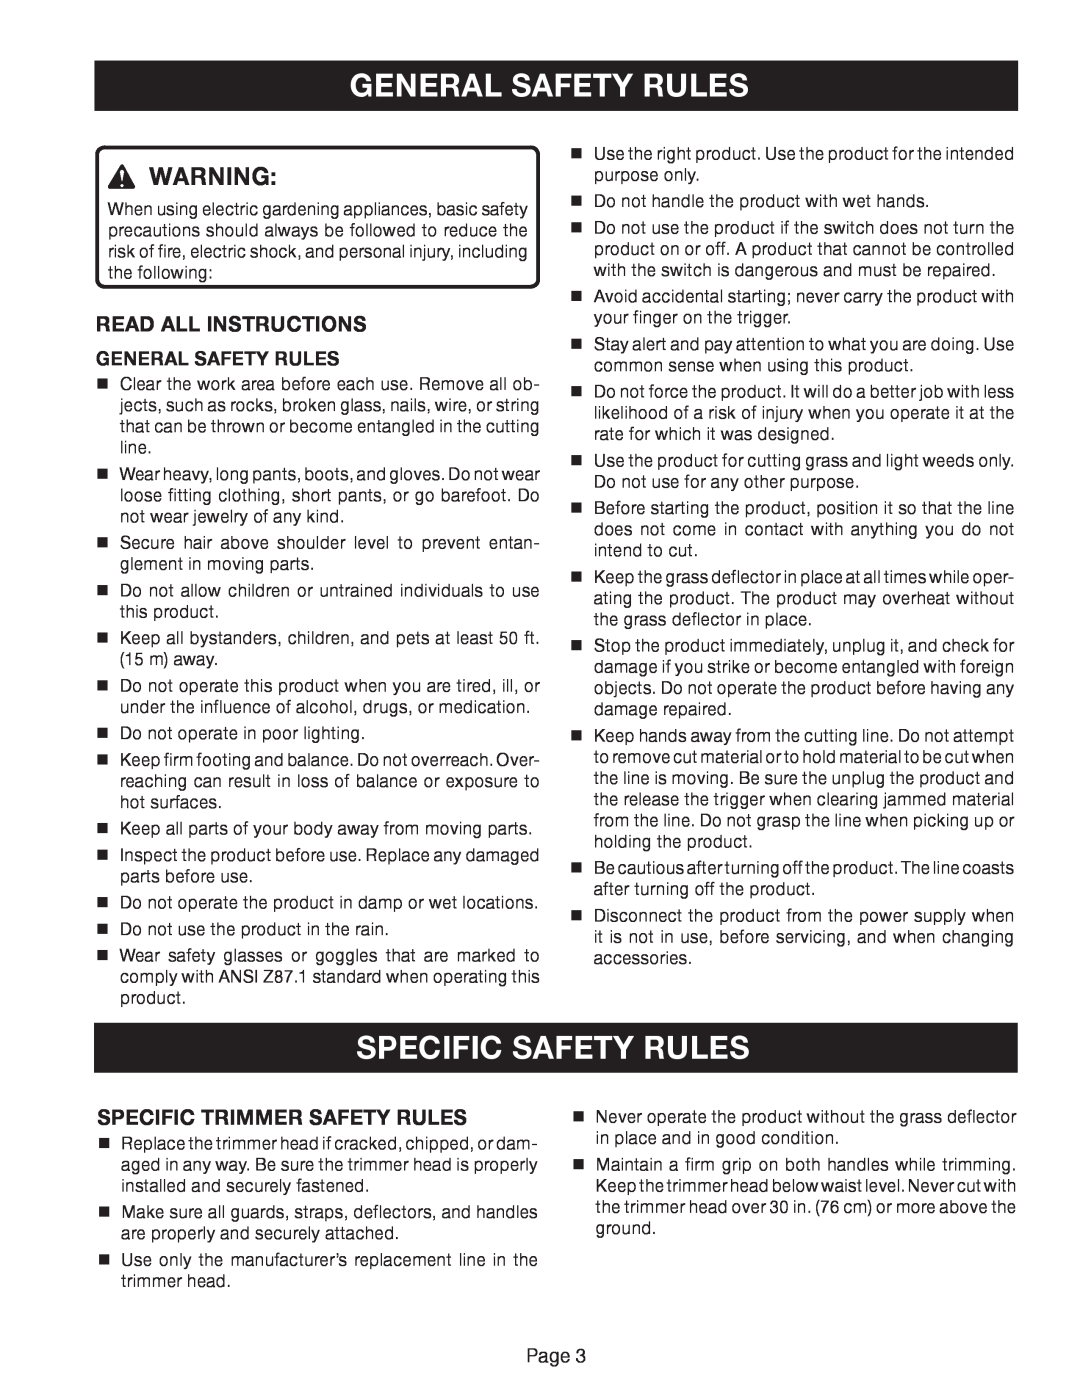 Ryobi Outdoor ZRRY41002 General Safety Rules, Specific Safety Rules, Read All Instructions, Specific Trimmer Safety Rules 